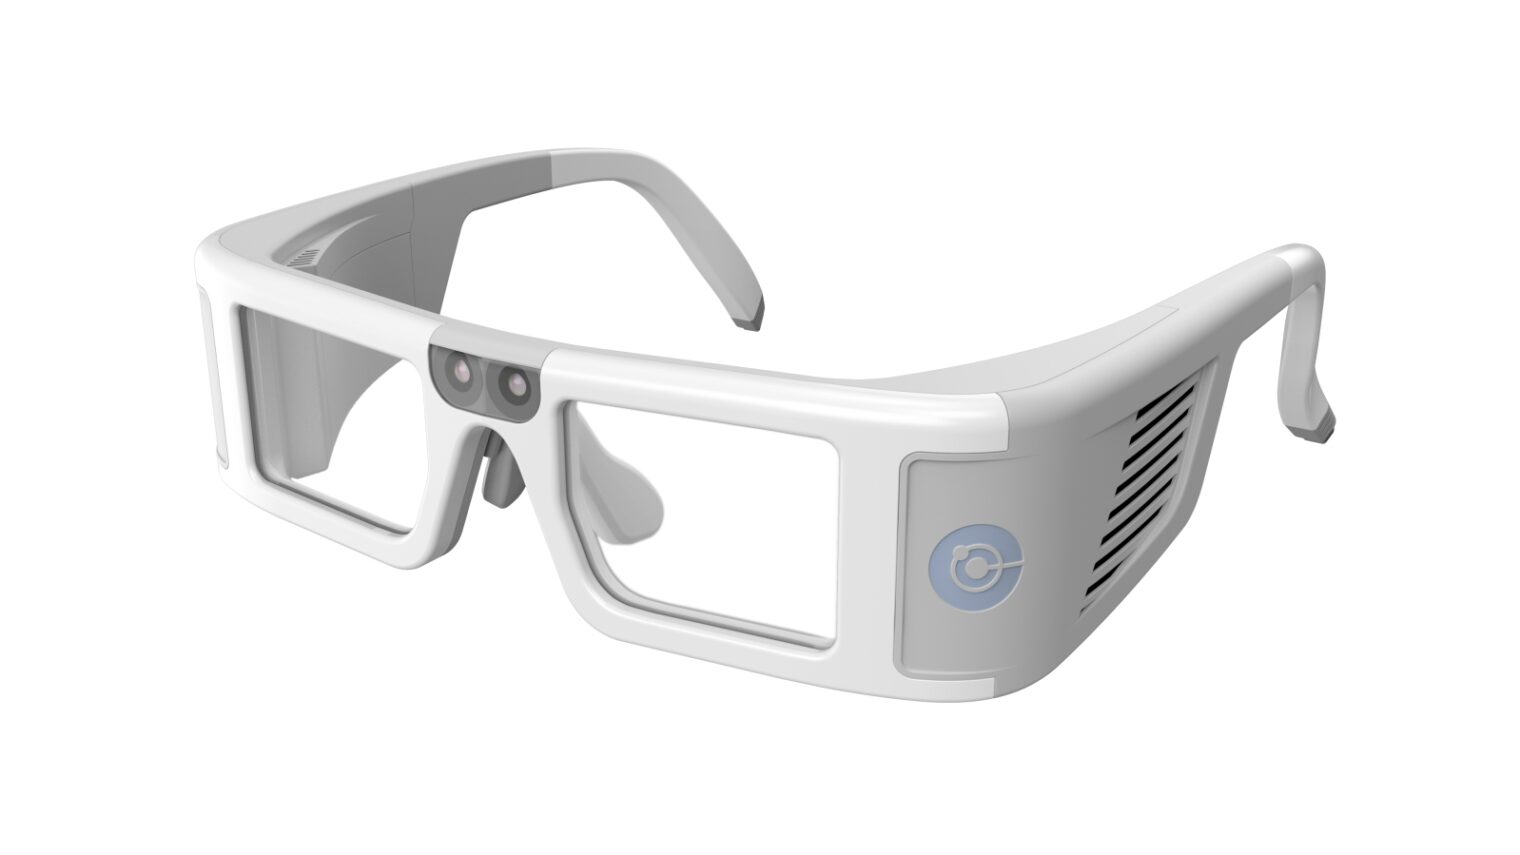 Orama digital eyeglasses use cutting-edge hardware and software to provide clearer images for people with retinal damage. Photo: courtesy